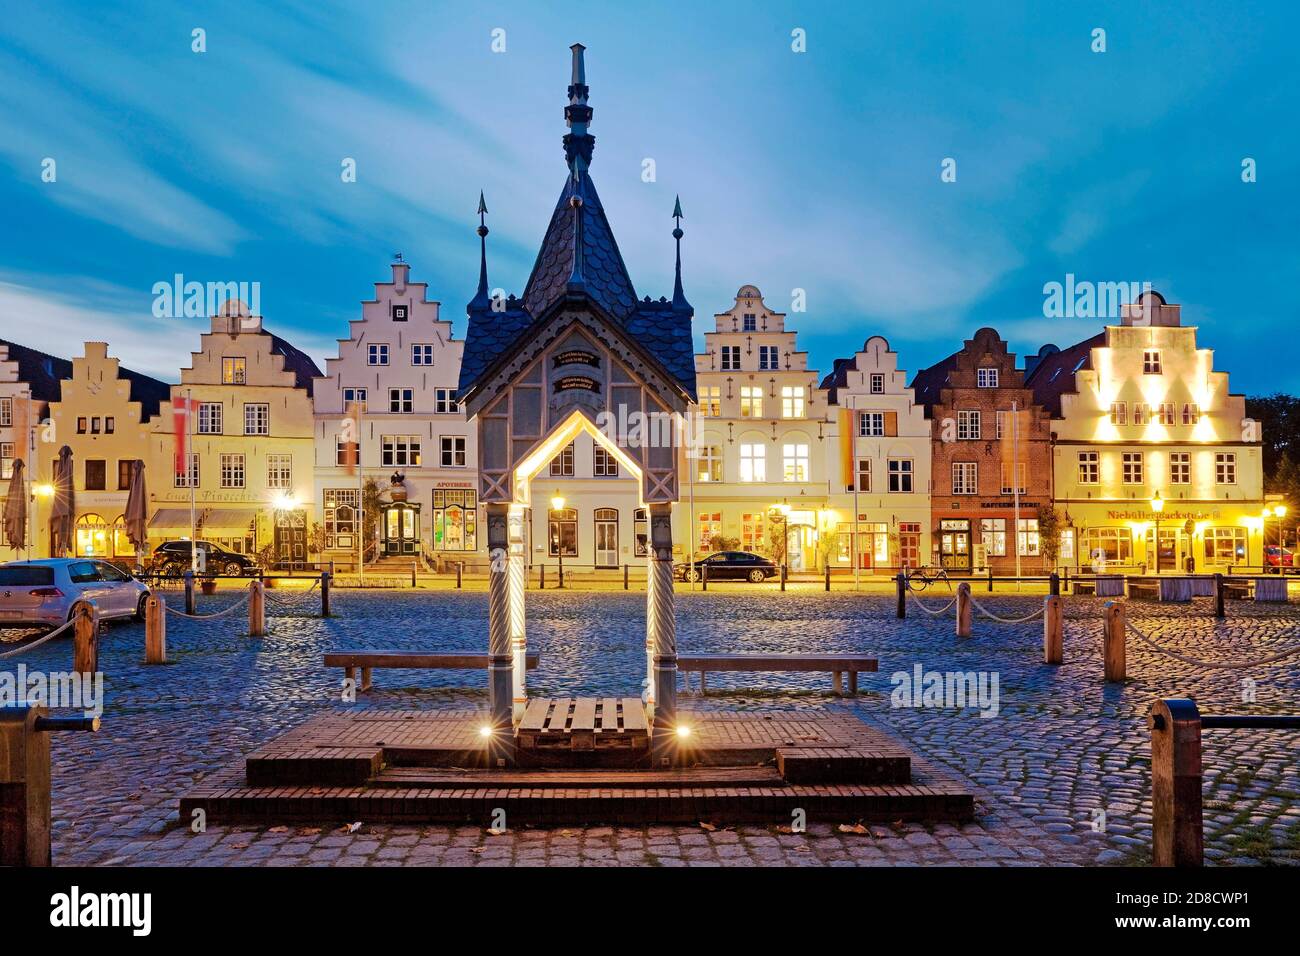 historic water pump on the market square in front of houses with stepped gables in the evening, Germany, Schleswig-Holstein, Northern Frisia, Stock Photo